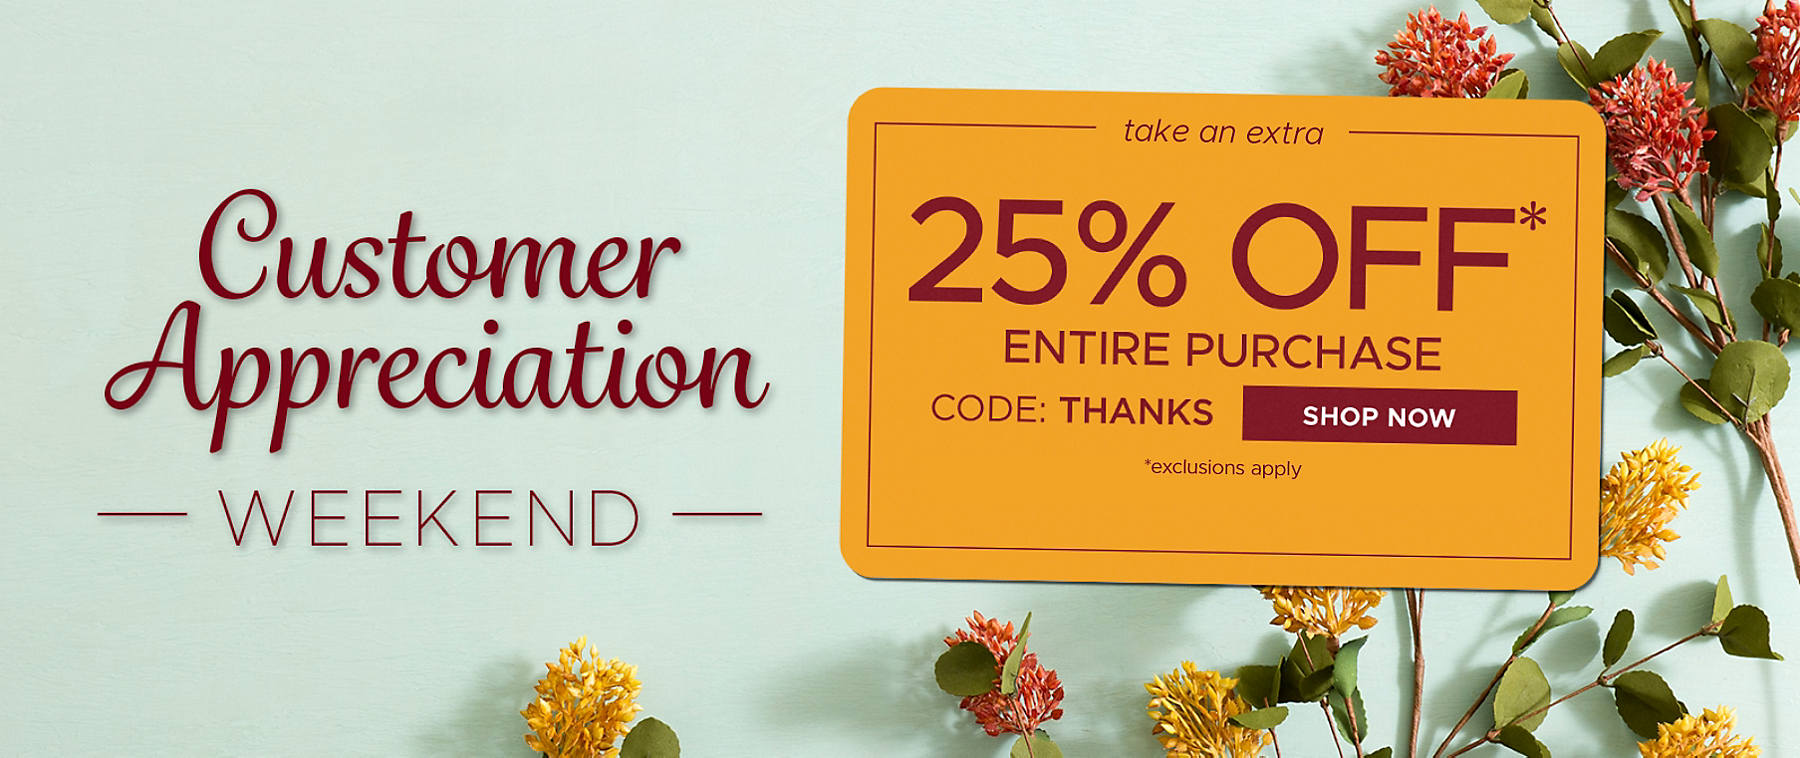 Customer Appreciation Weekend take an extra 25% off* entire purchase code: THANKS Shop Now *exclusions apply